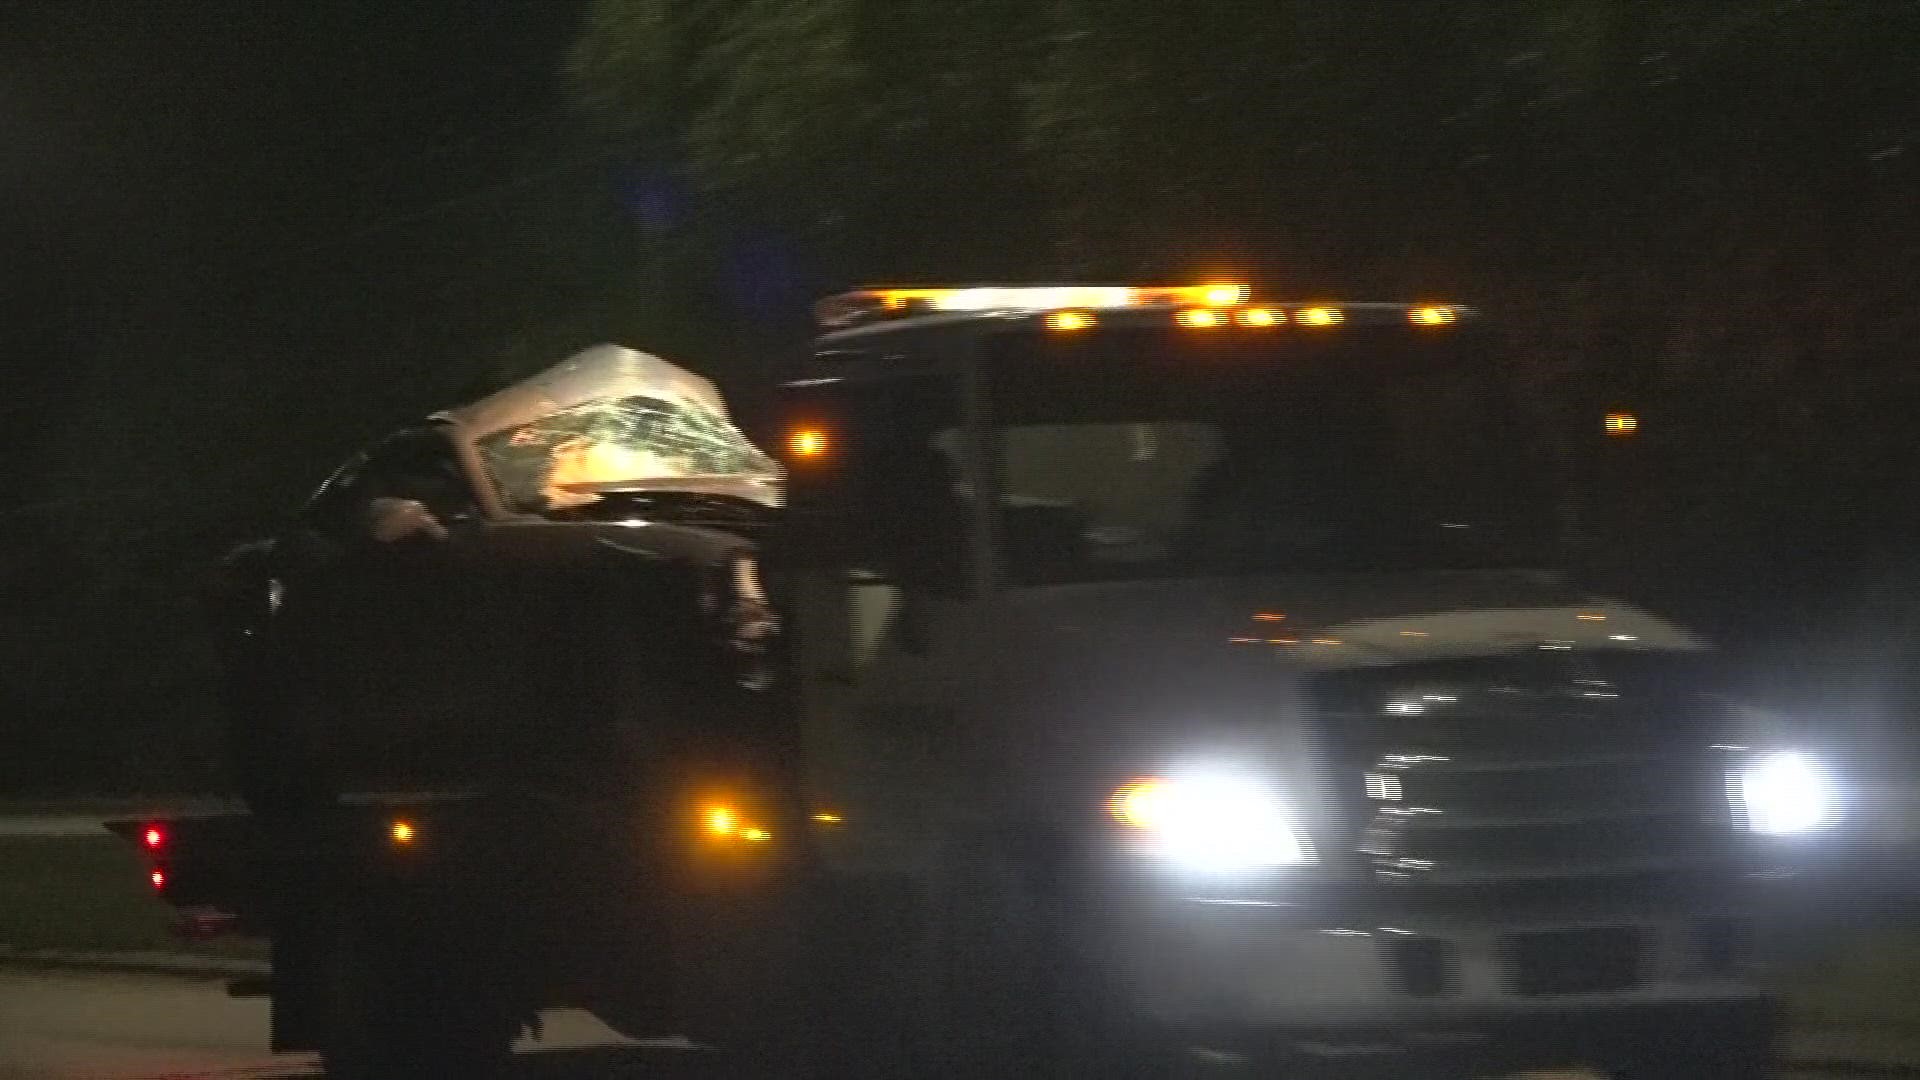 A 31-year-old man is dead after a crash on Monument Road Wednesday night, according to JSO. The accident happened just before 10 p.m.